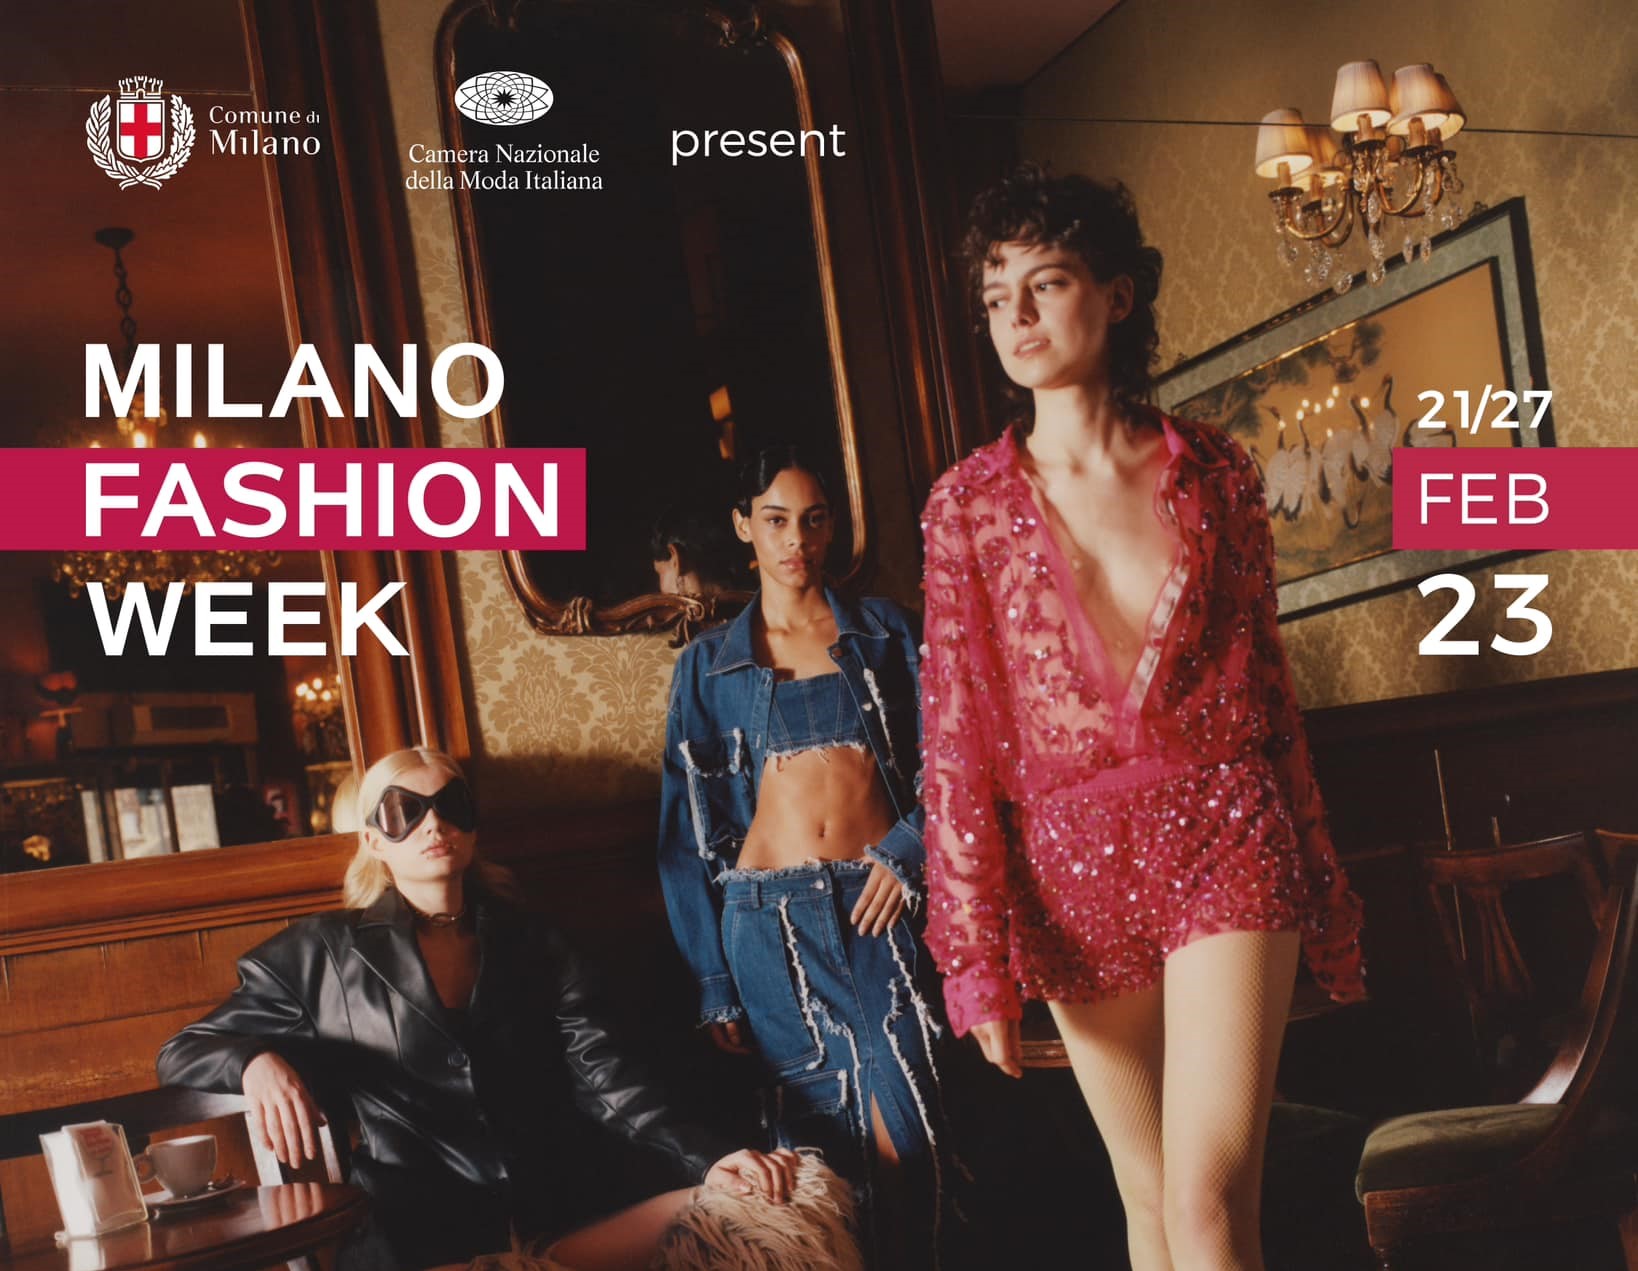 Milan Fashion Week 2023 kicks off, from today until February 27